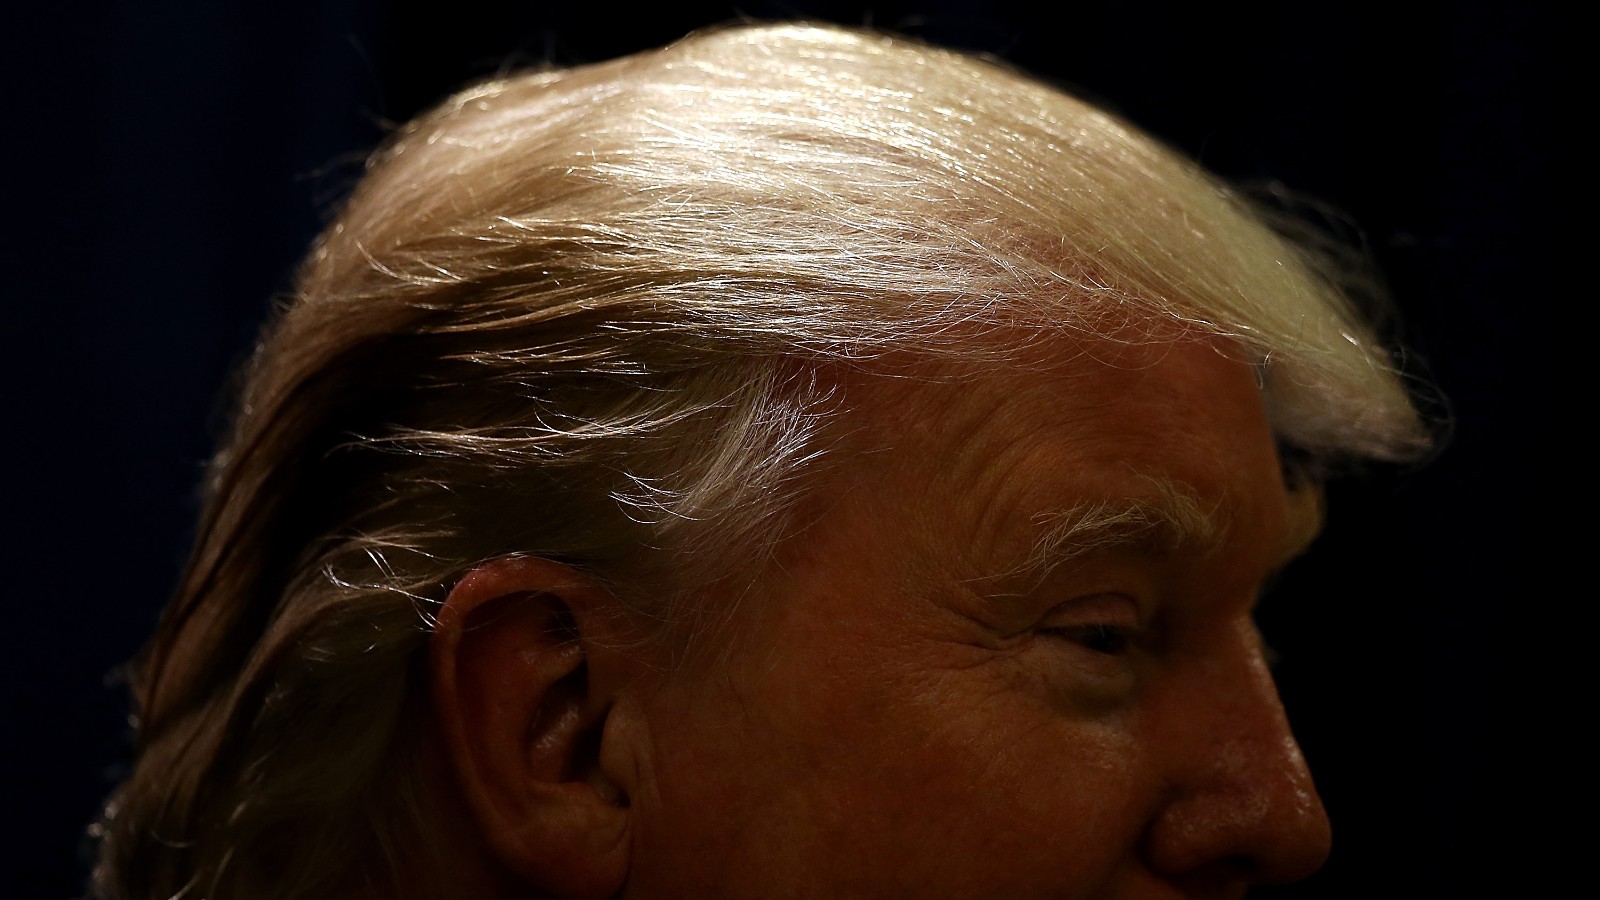 Trump S Comb Over And The Psychology Of Male Hairstyles Cnn